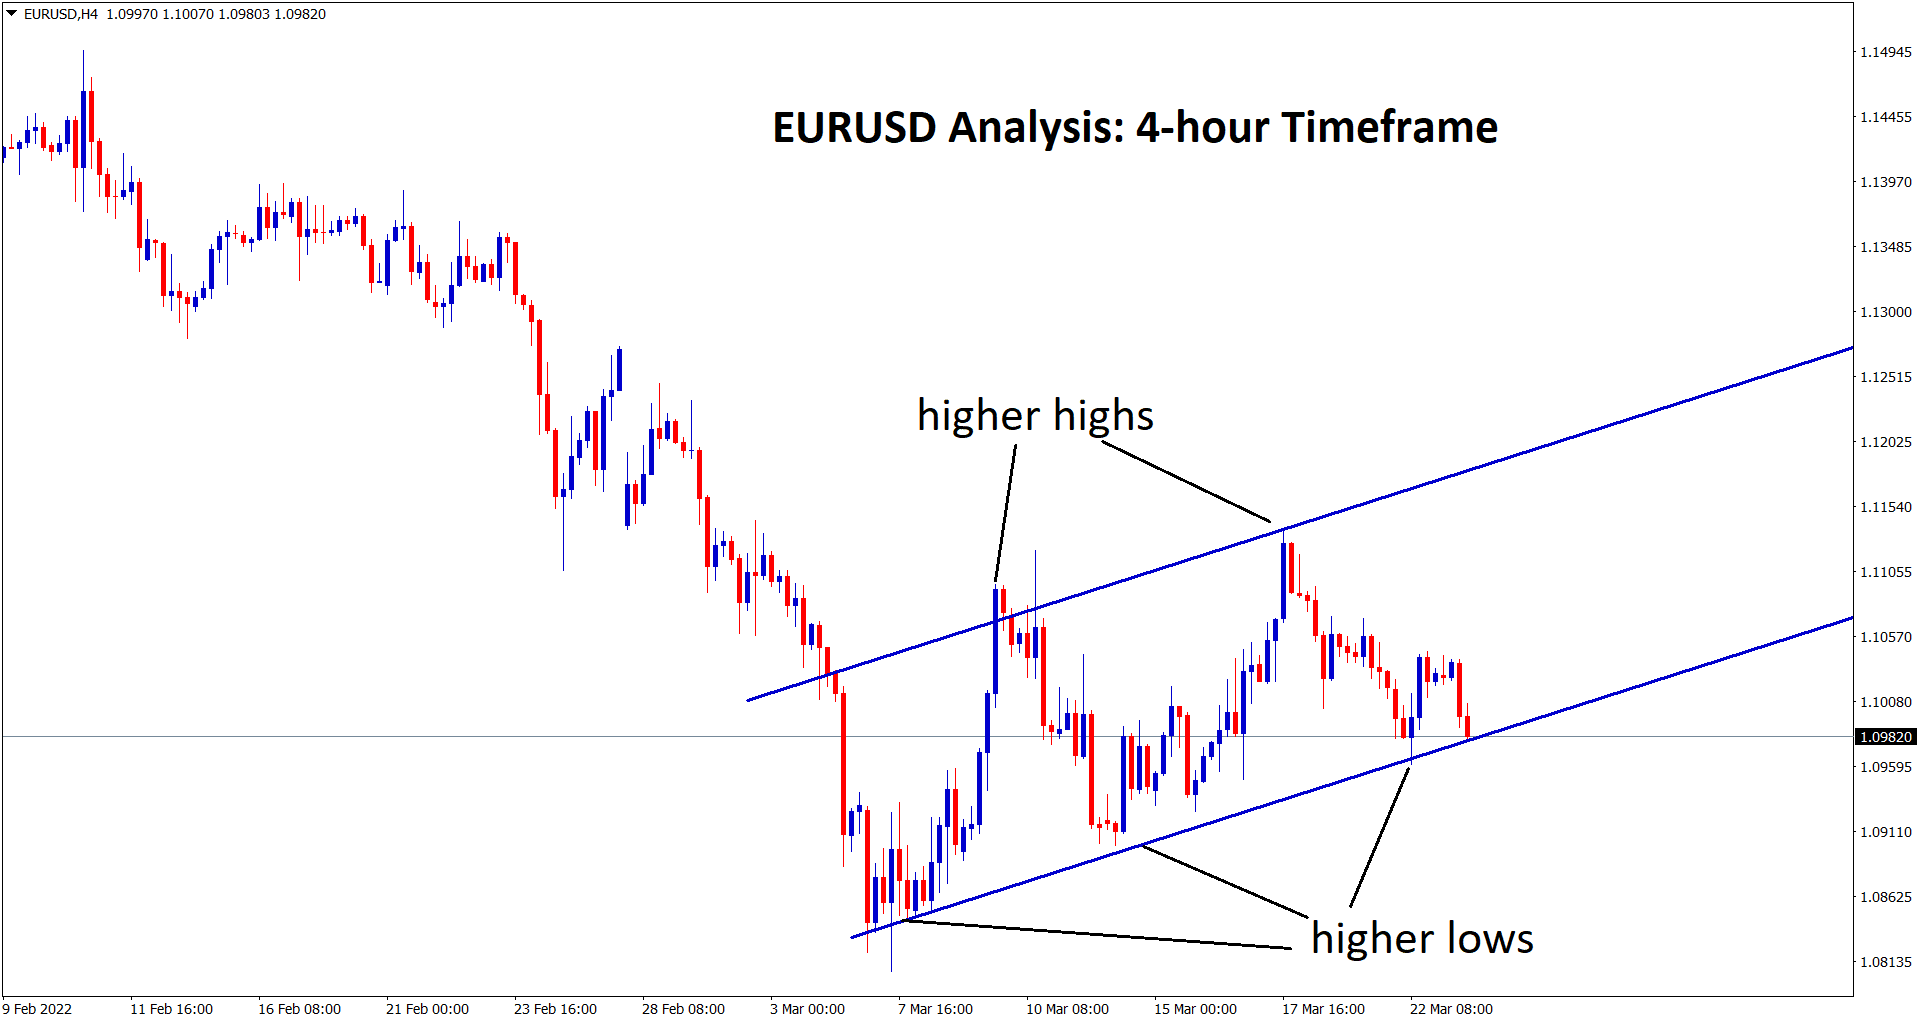 EURUSD hits the higher low area again in the 4 hour timeframe chart